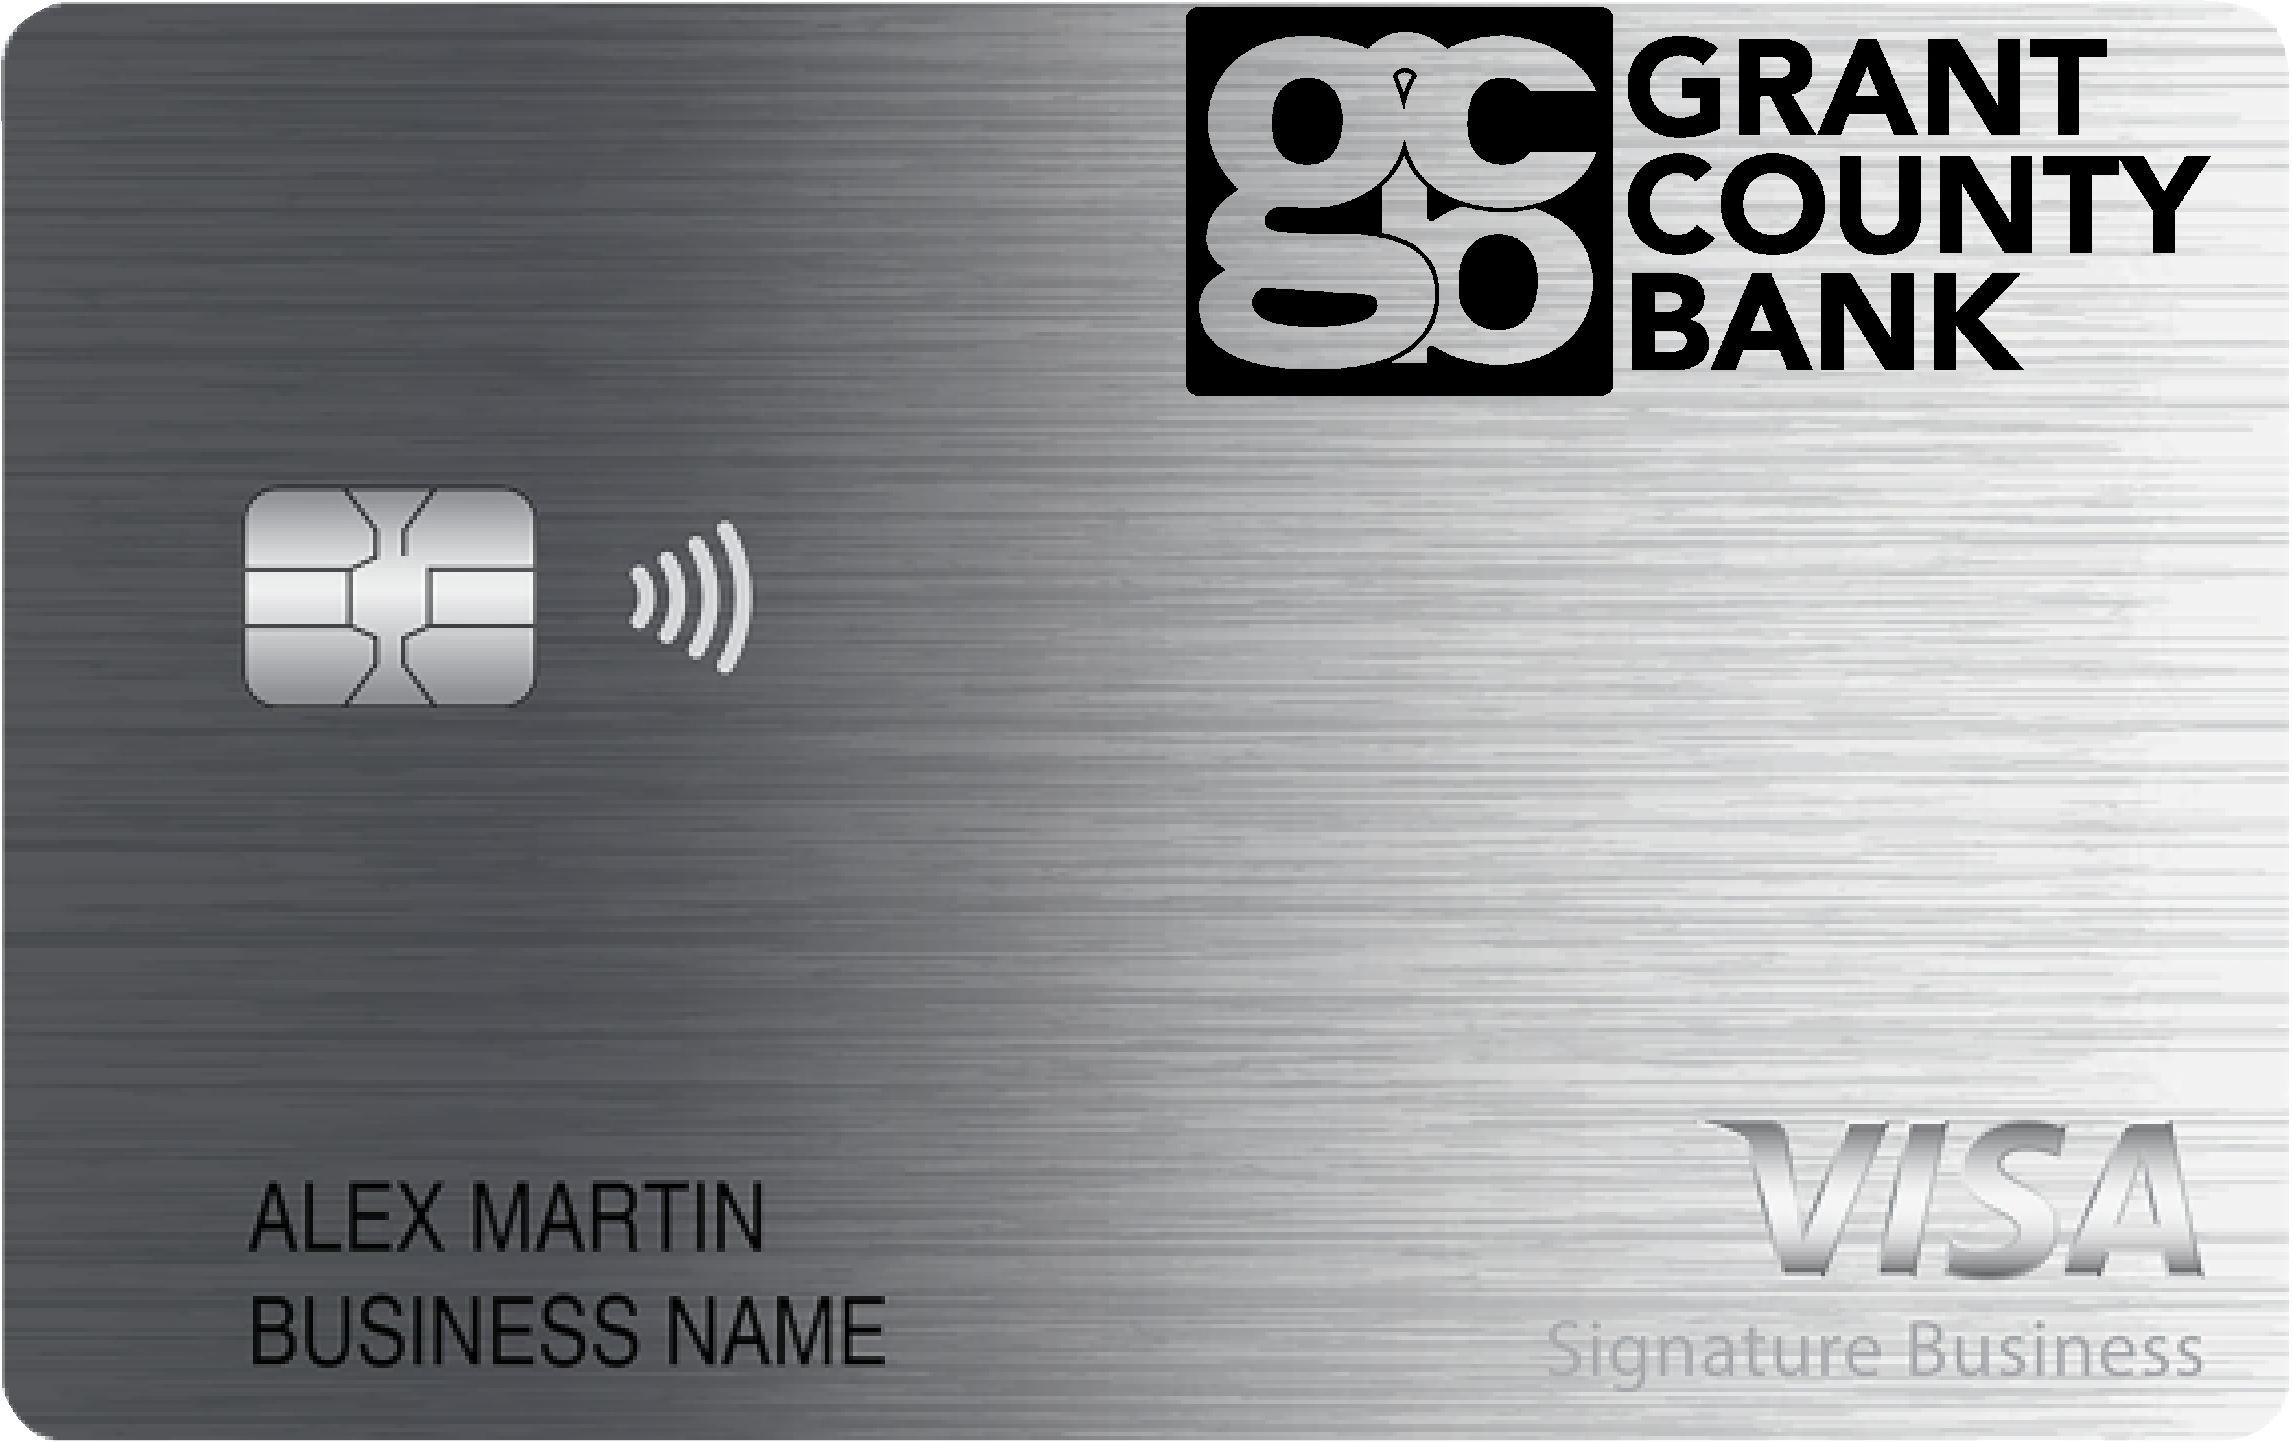 Grant County Bank Smart Business Rewards Card